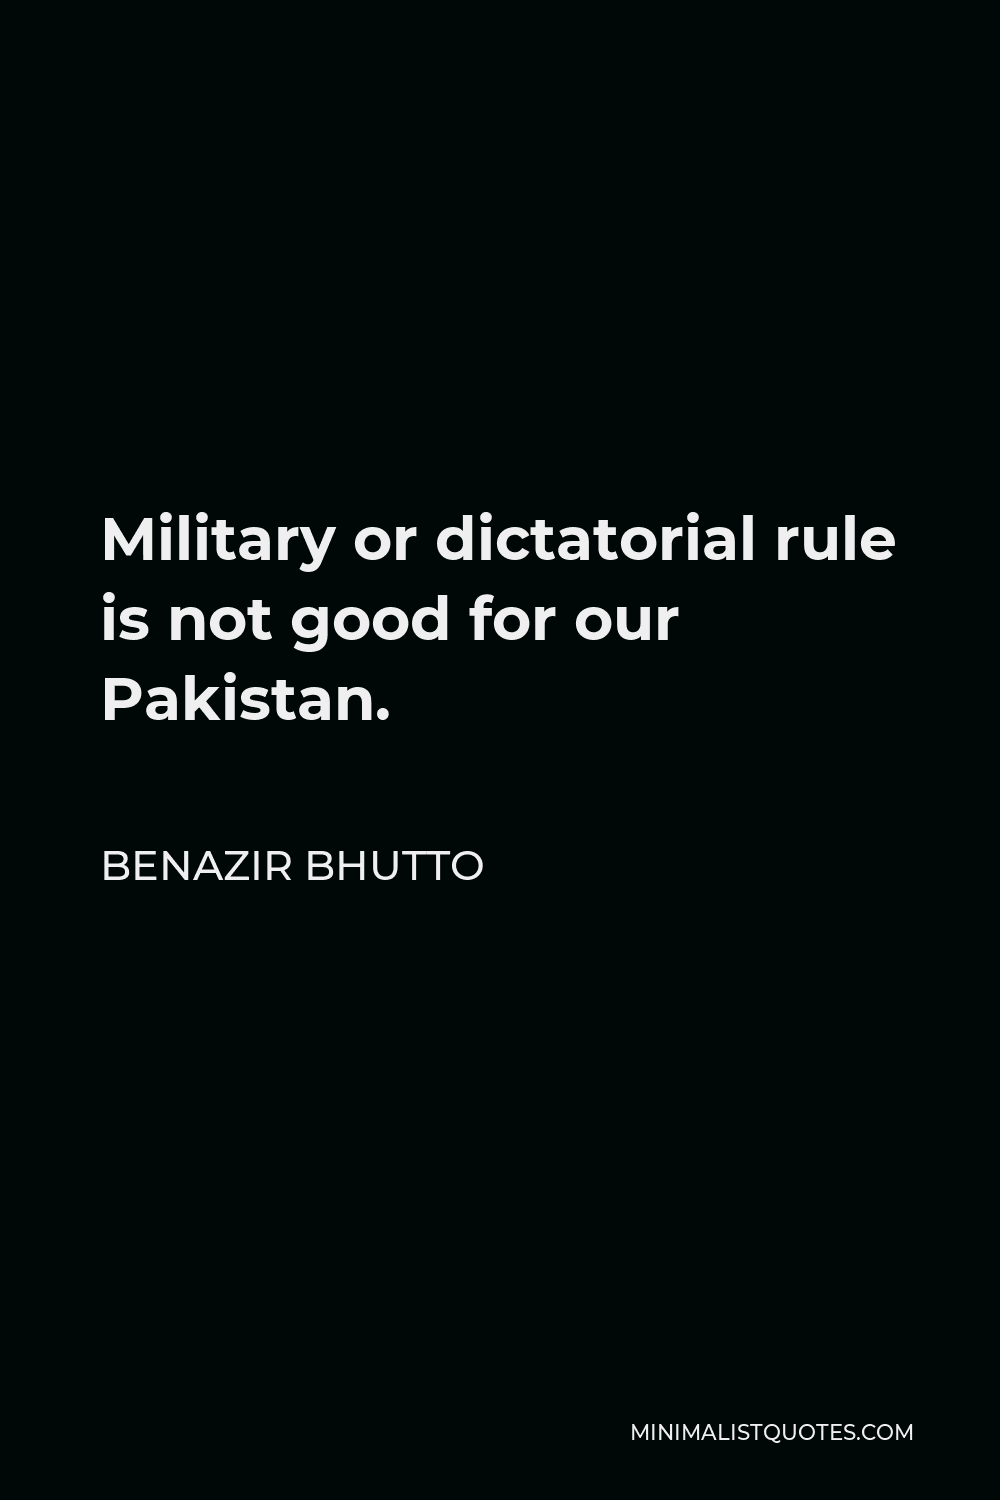 Benazir Bhutto Quote - Military or dictatorial rule is not good for our Pakistan.